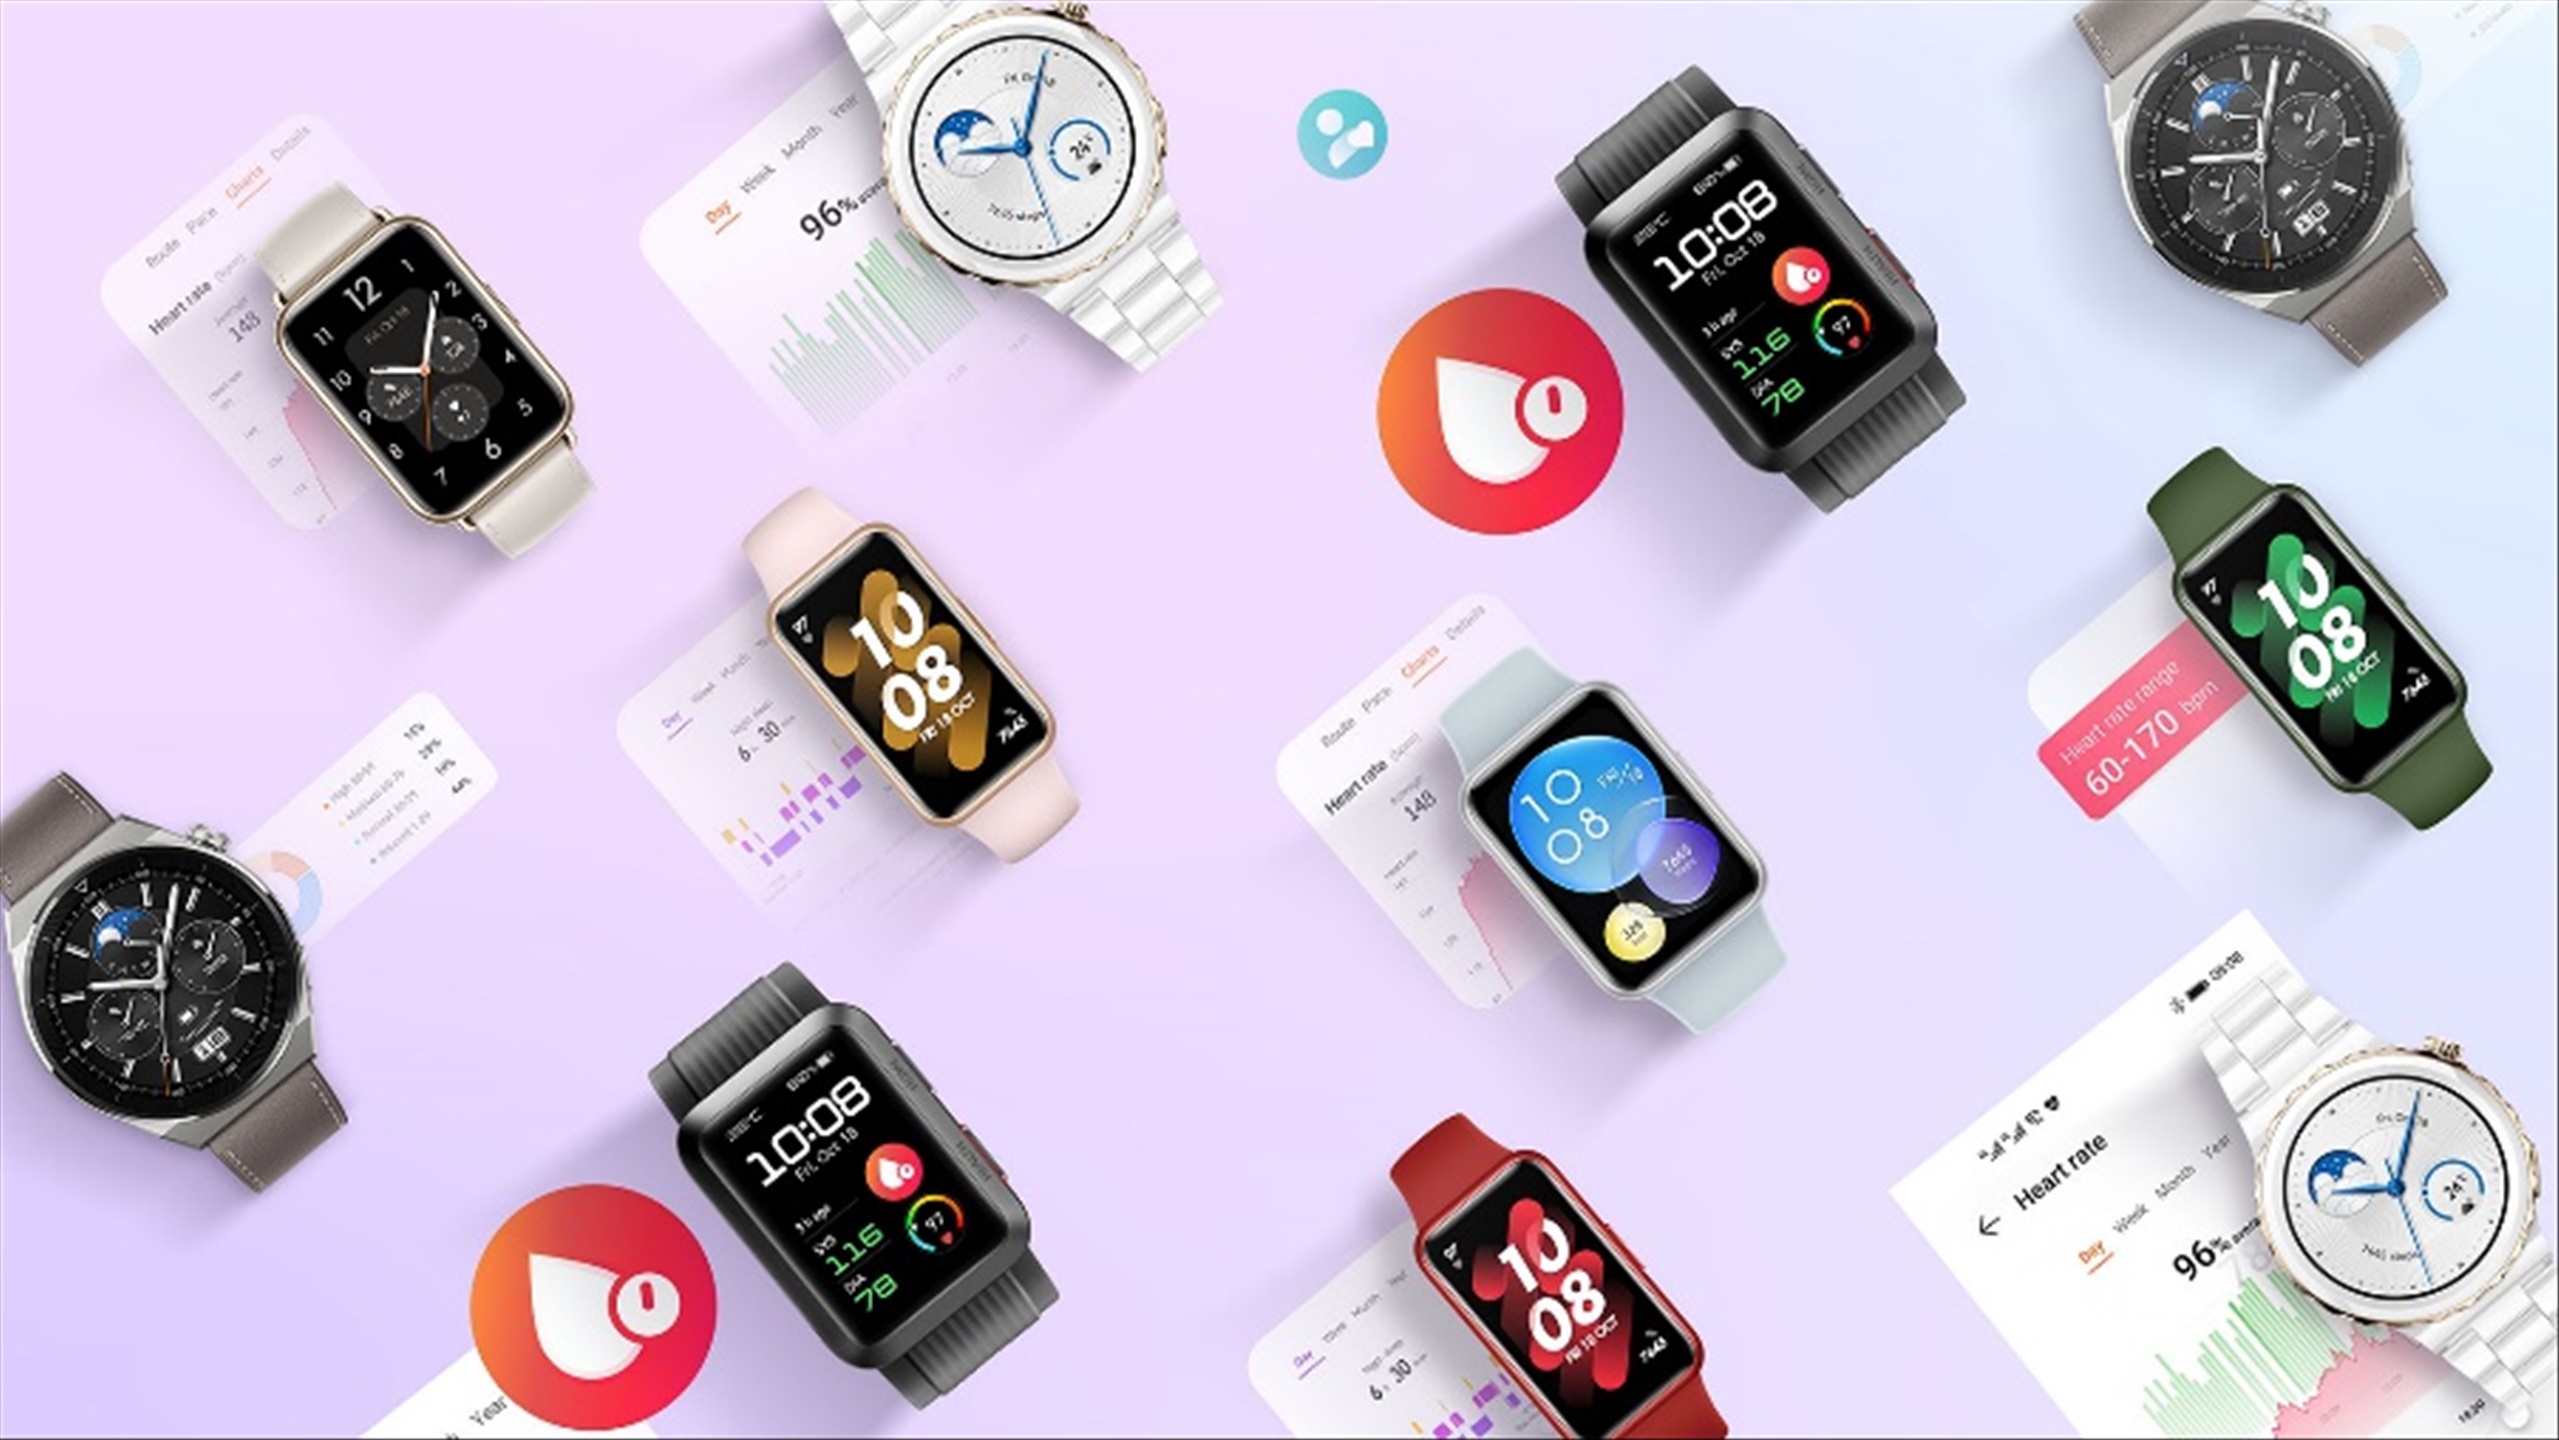 Huawei just launched four new wearables in Australia